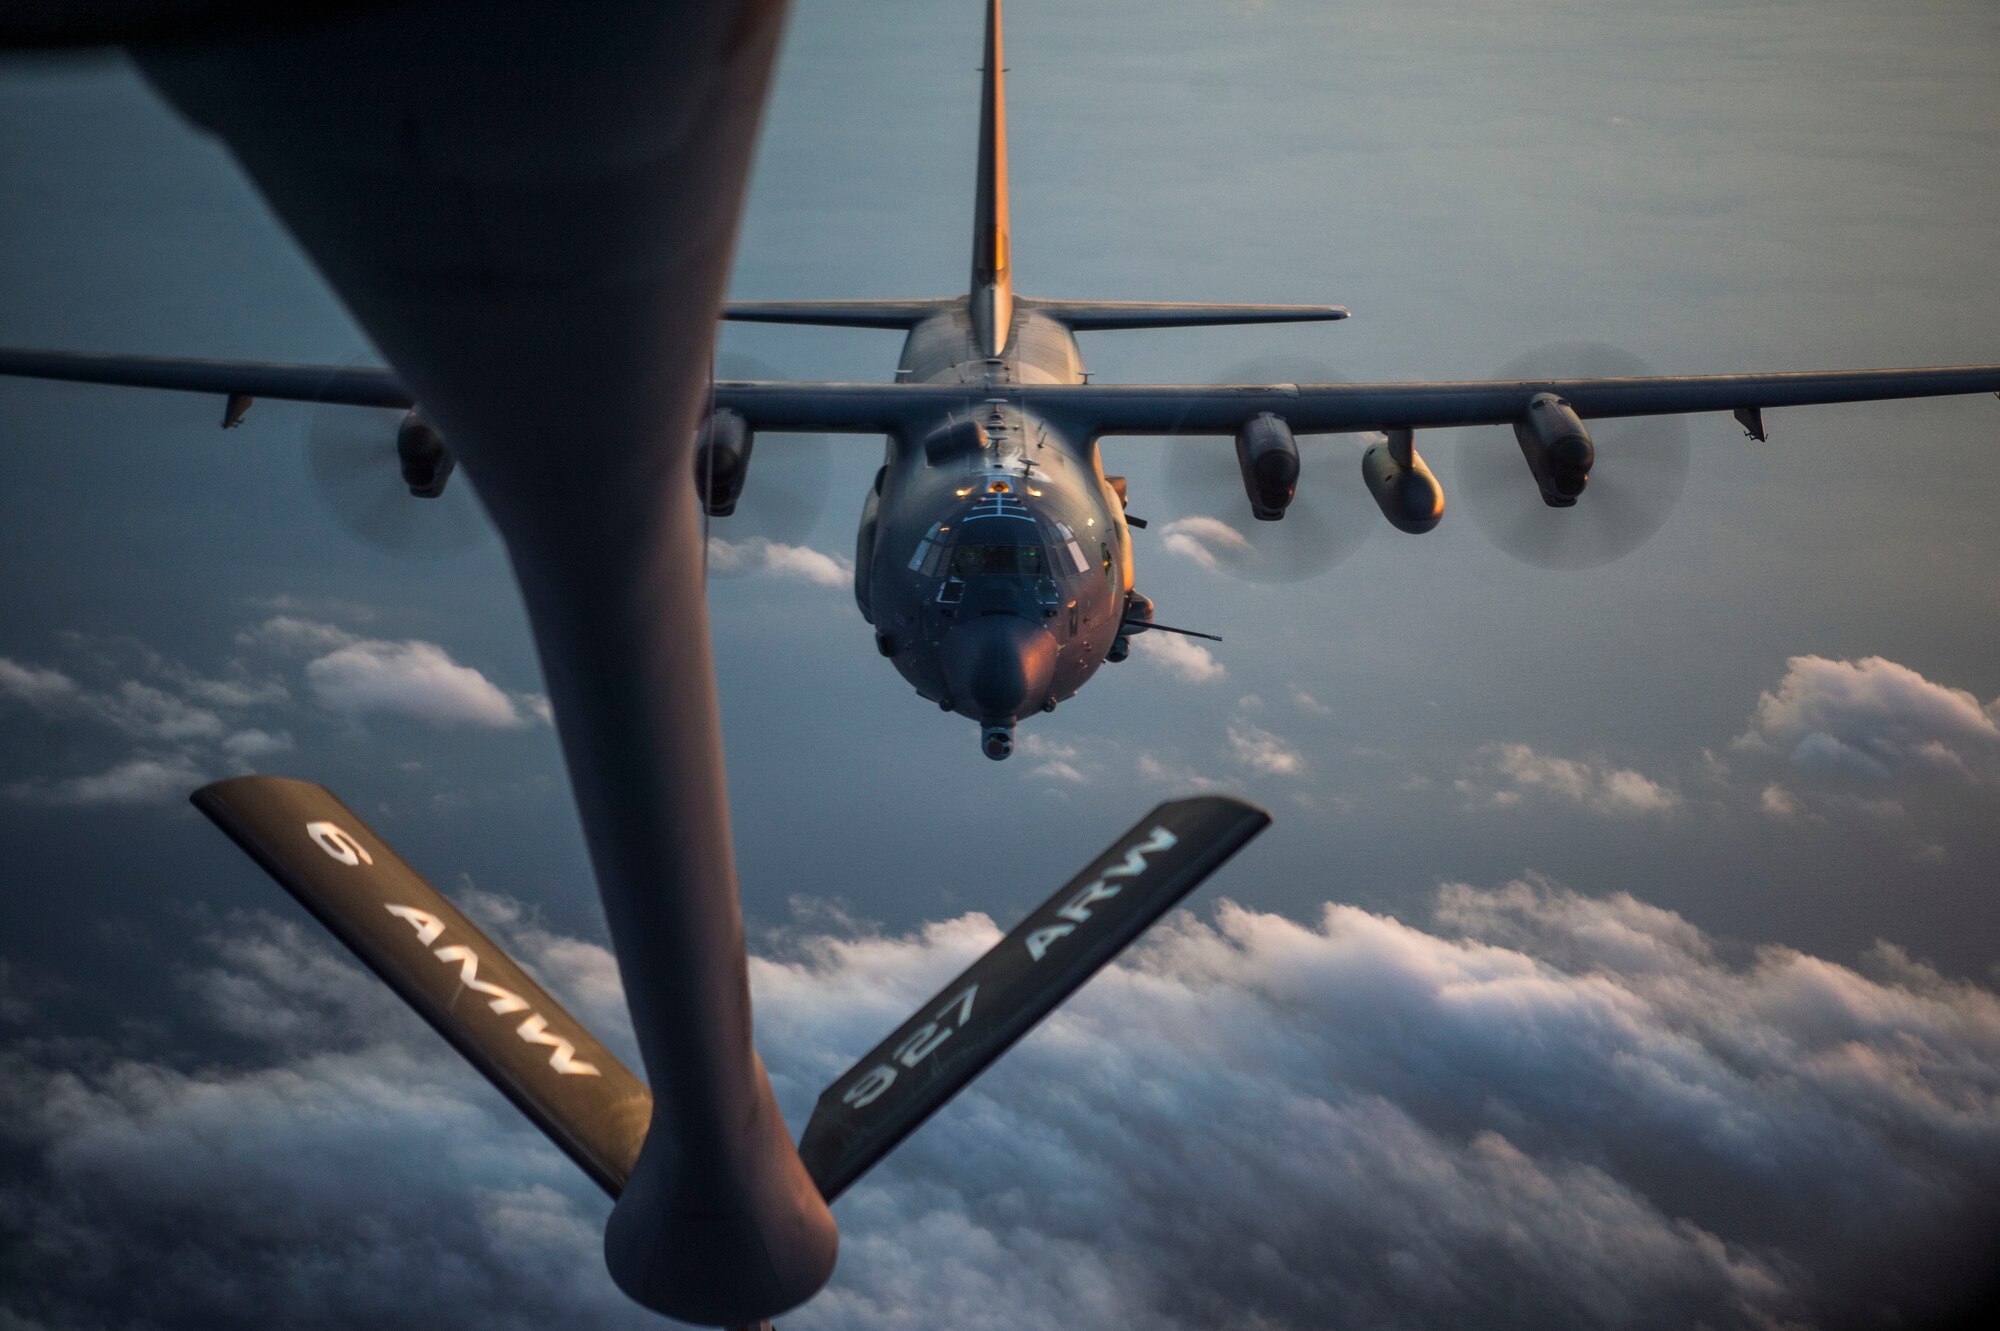 An AC-130 gunship closes in to receive fuel from a KC-135 Stratotanker assigned to the 6th Air Mobility Wing during Exercise Emerald Warrior, Jan. 17, 2019.